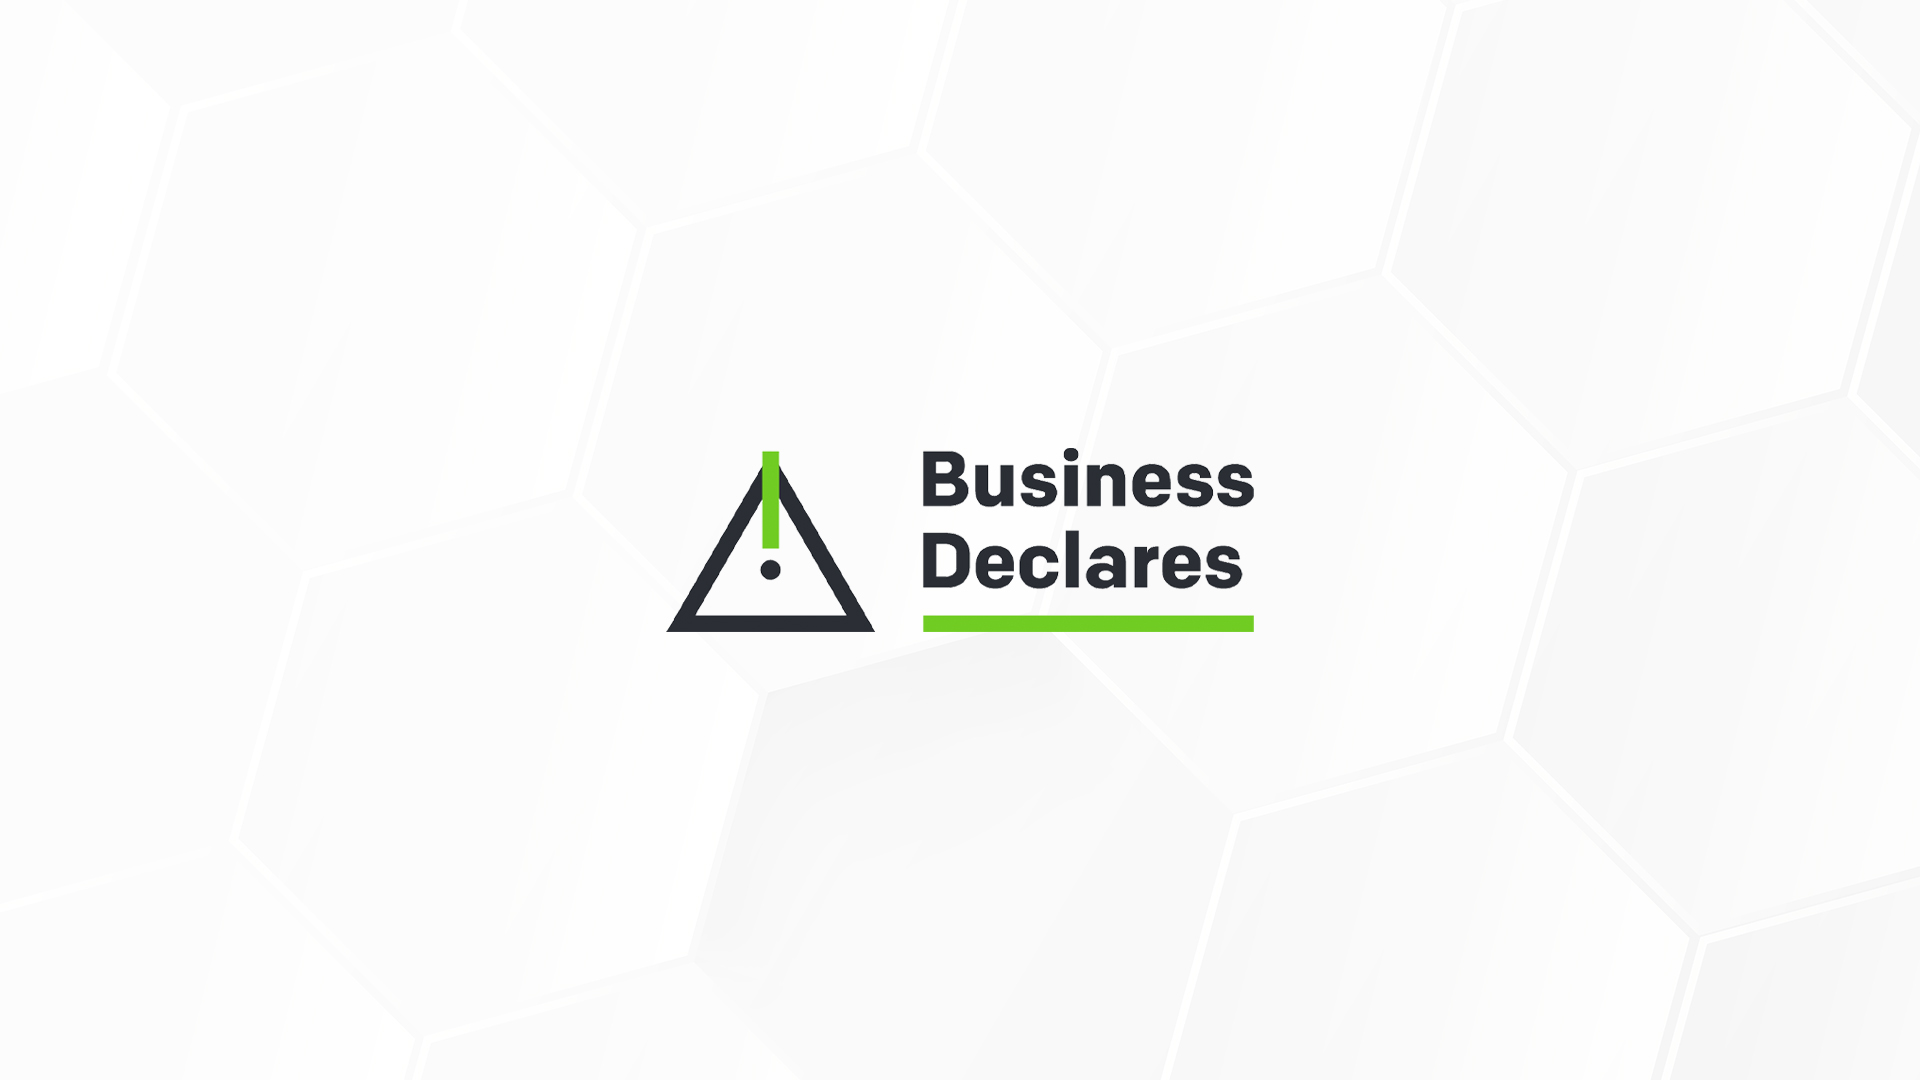 Why ALLpaQ has joined Business Declares